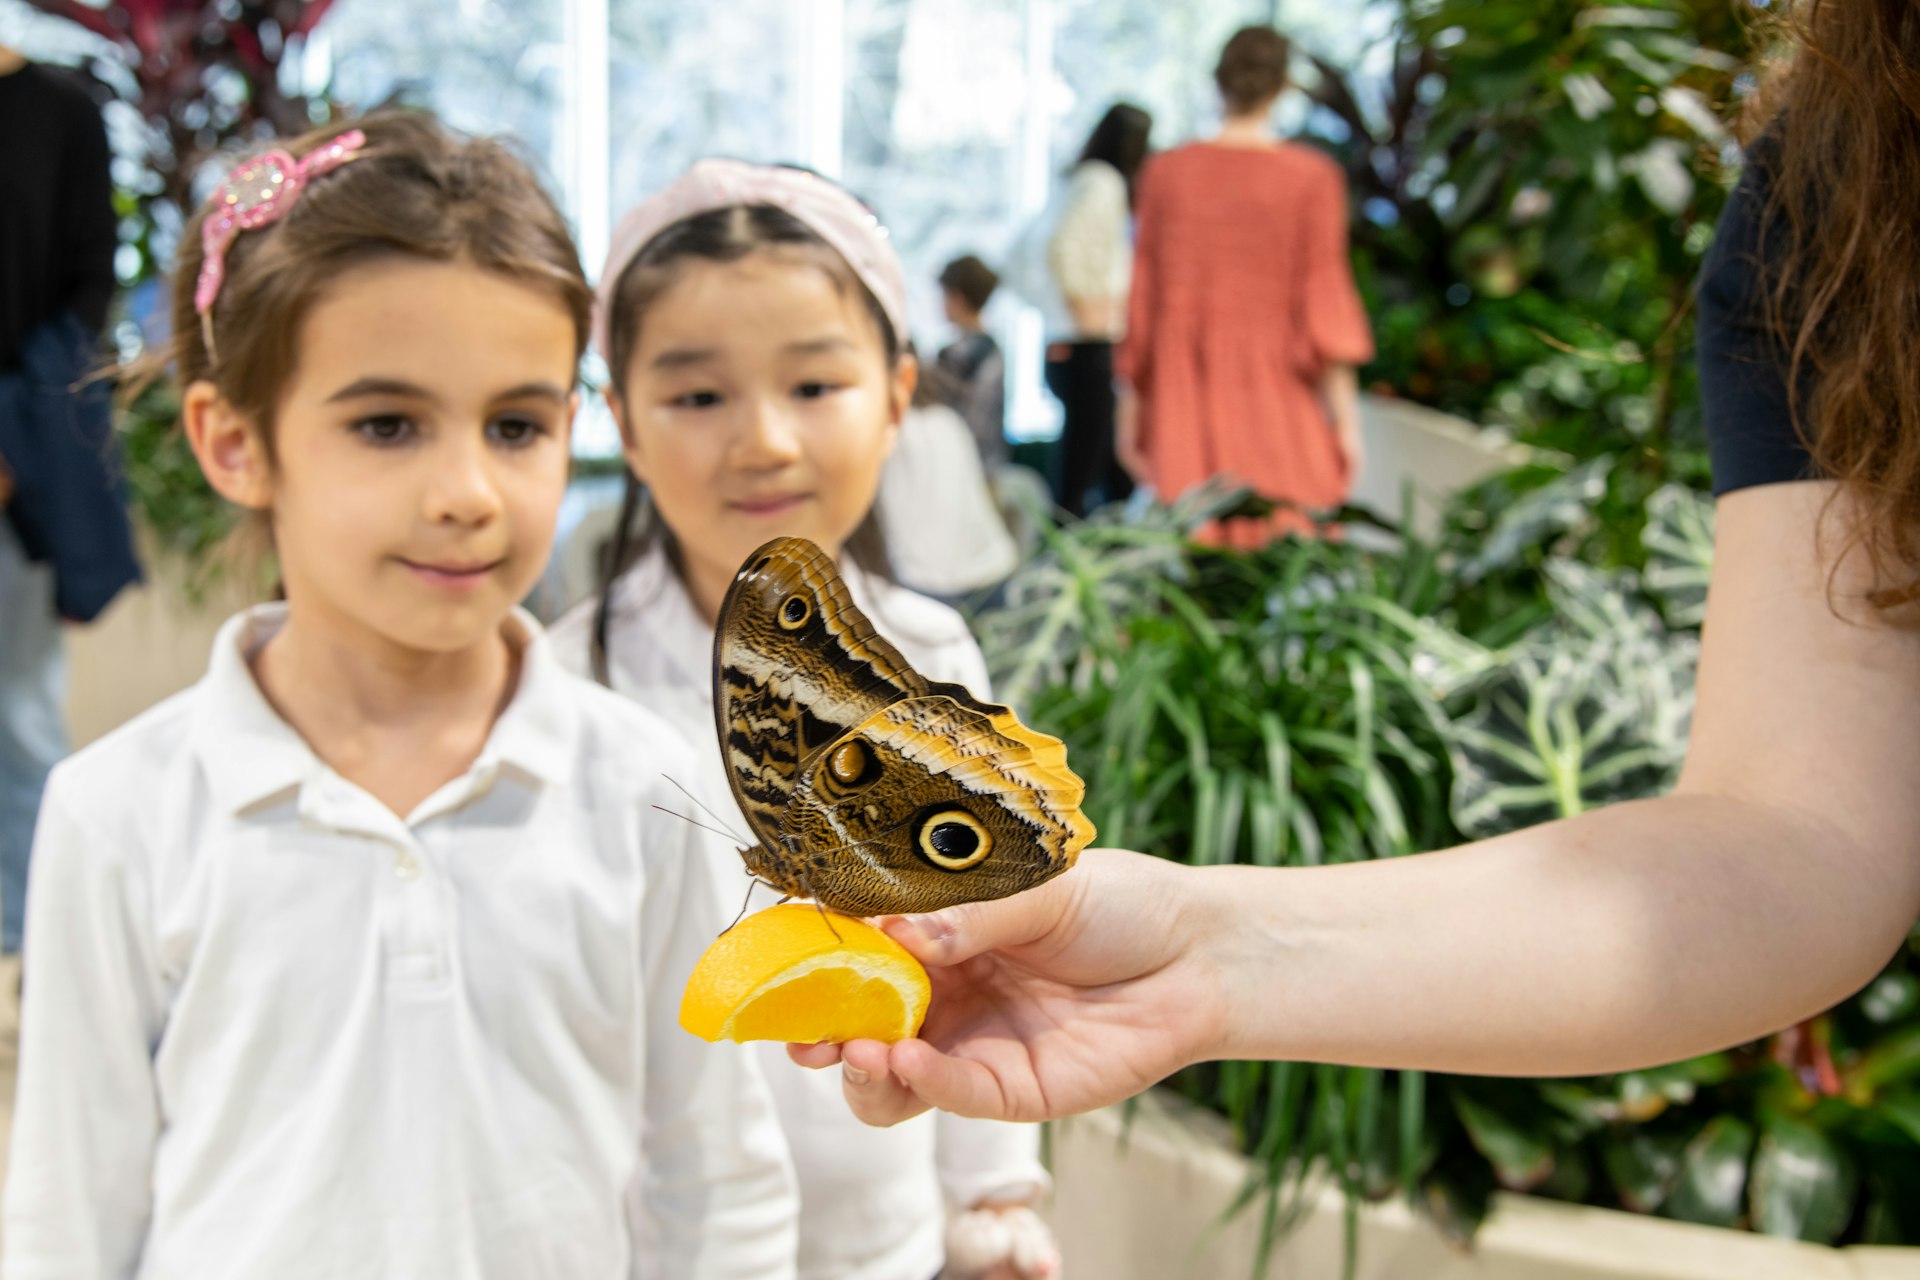 Two girls looking at UNID American Museum of Natural History holding an orange slice with butterfly perched on it.